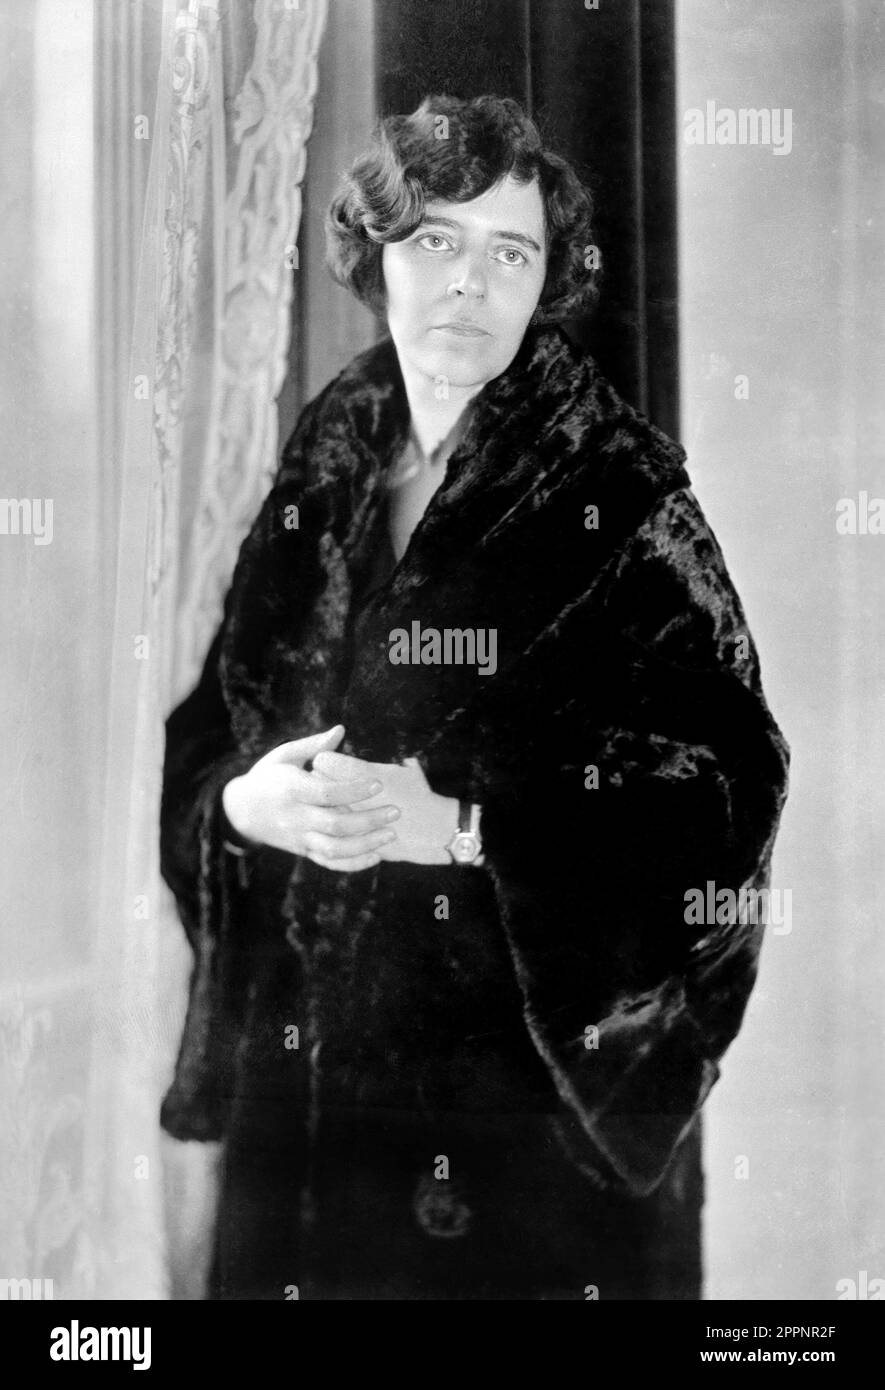 Alice Paul. Portrait of the American Quaker suffragist and women's rights activist, Alice Stokes Paul (1885-1977) by Underwood and Underwood, c. 1923 Stock Photo